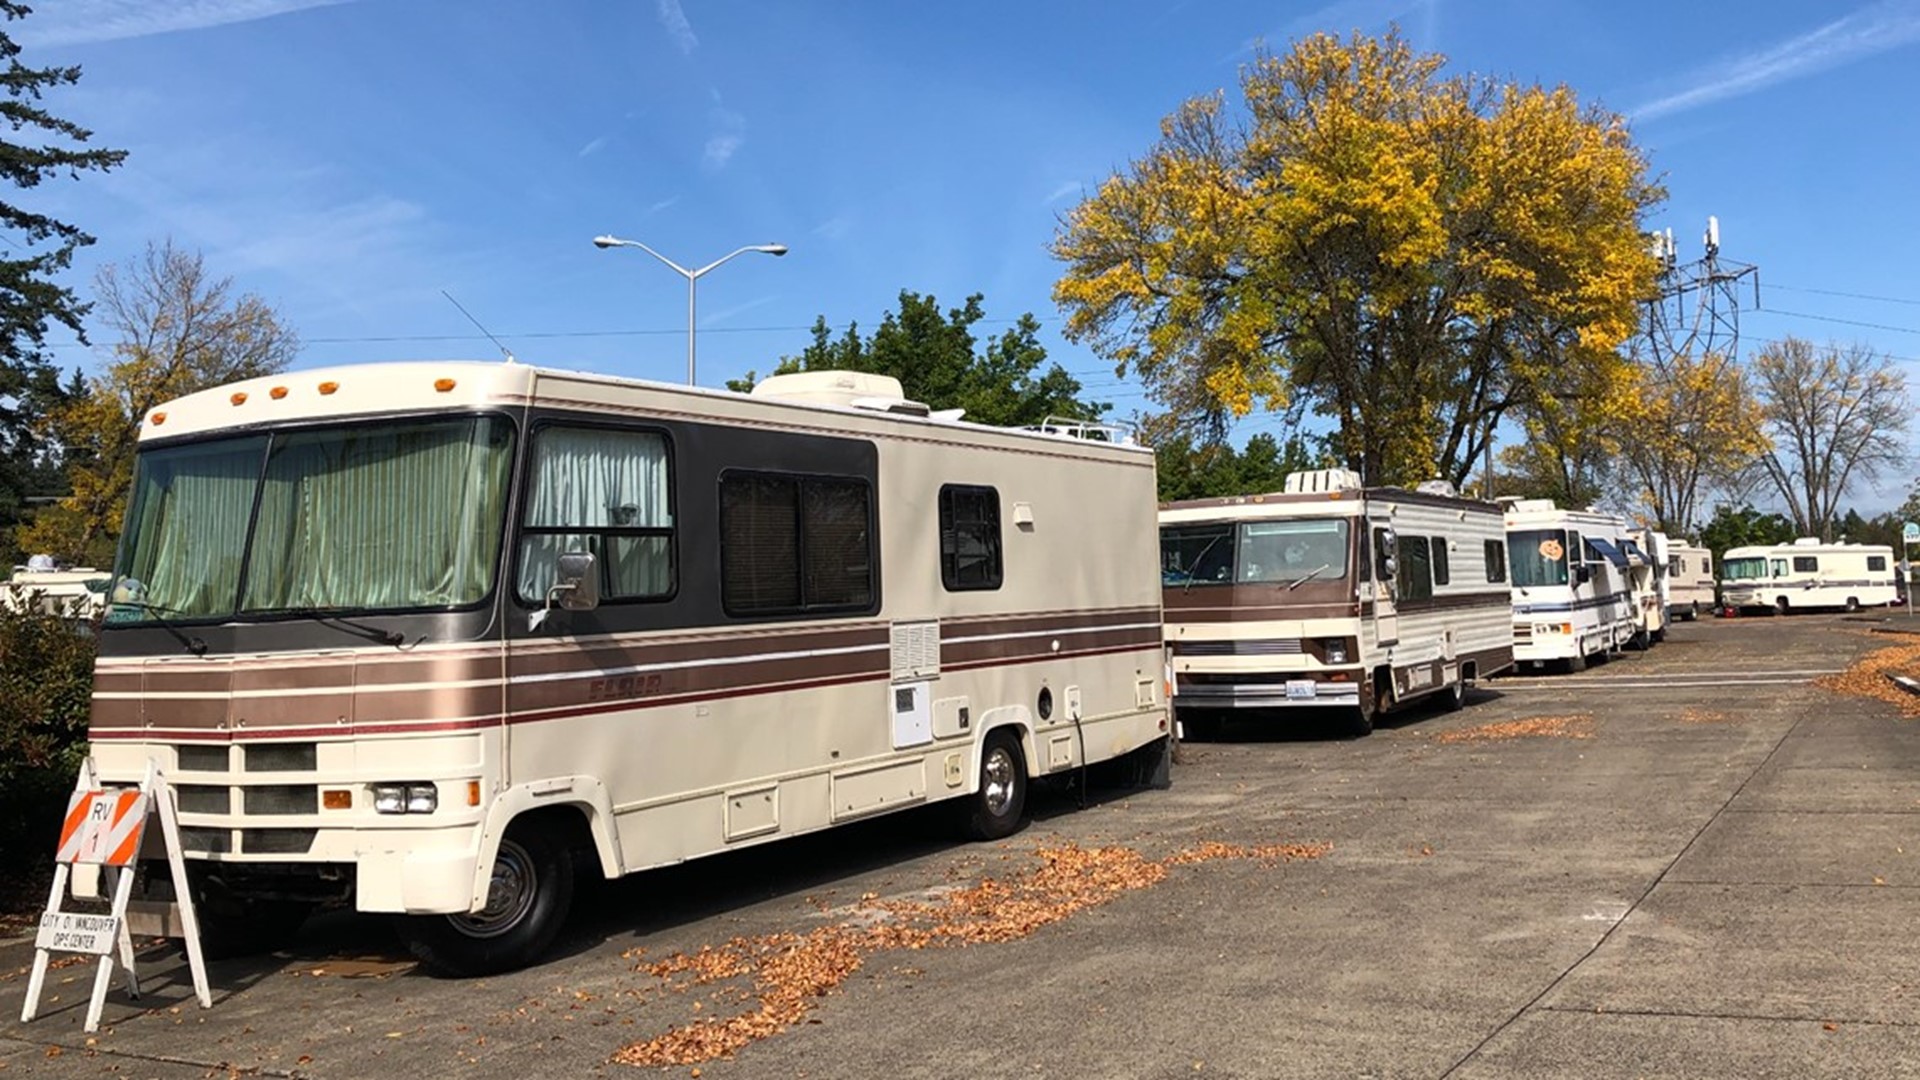 The Sunderland RV Safe Park has the capacity to hold 55 vehicles. The city of Portland hasn't announced an official opening day yet.